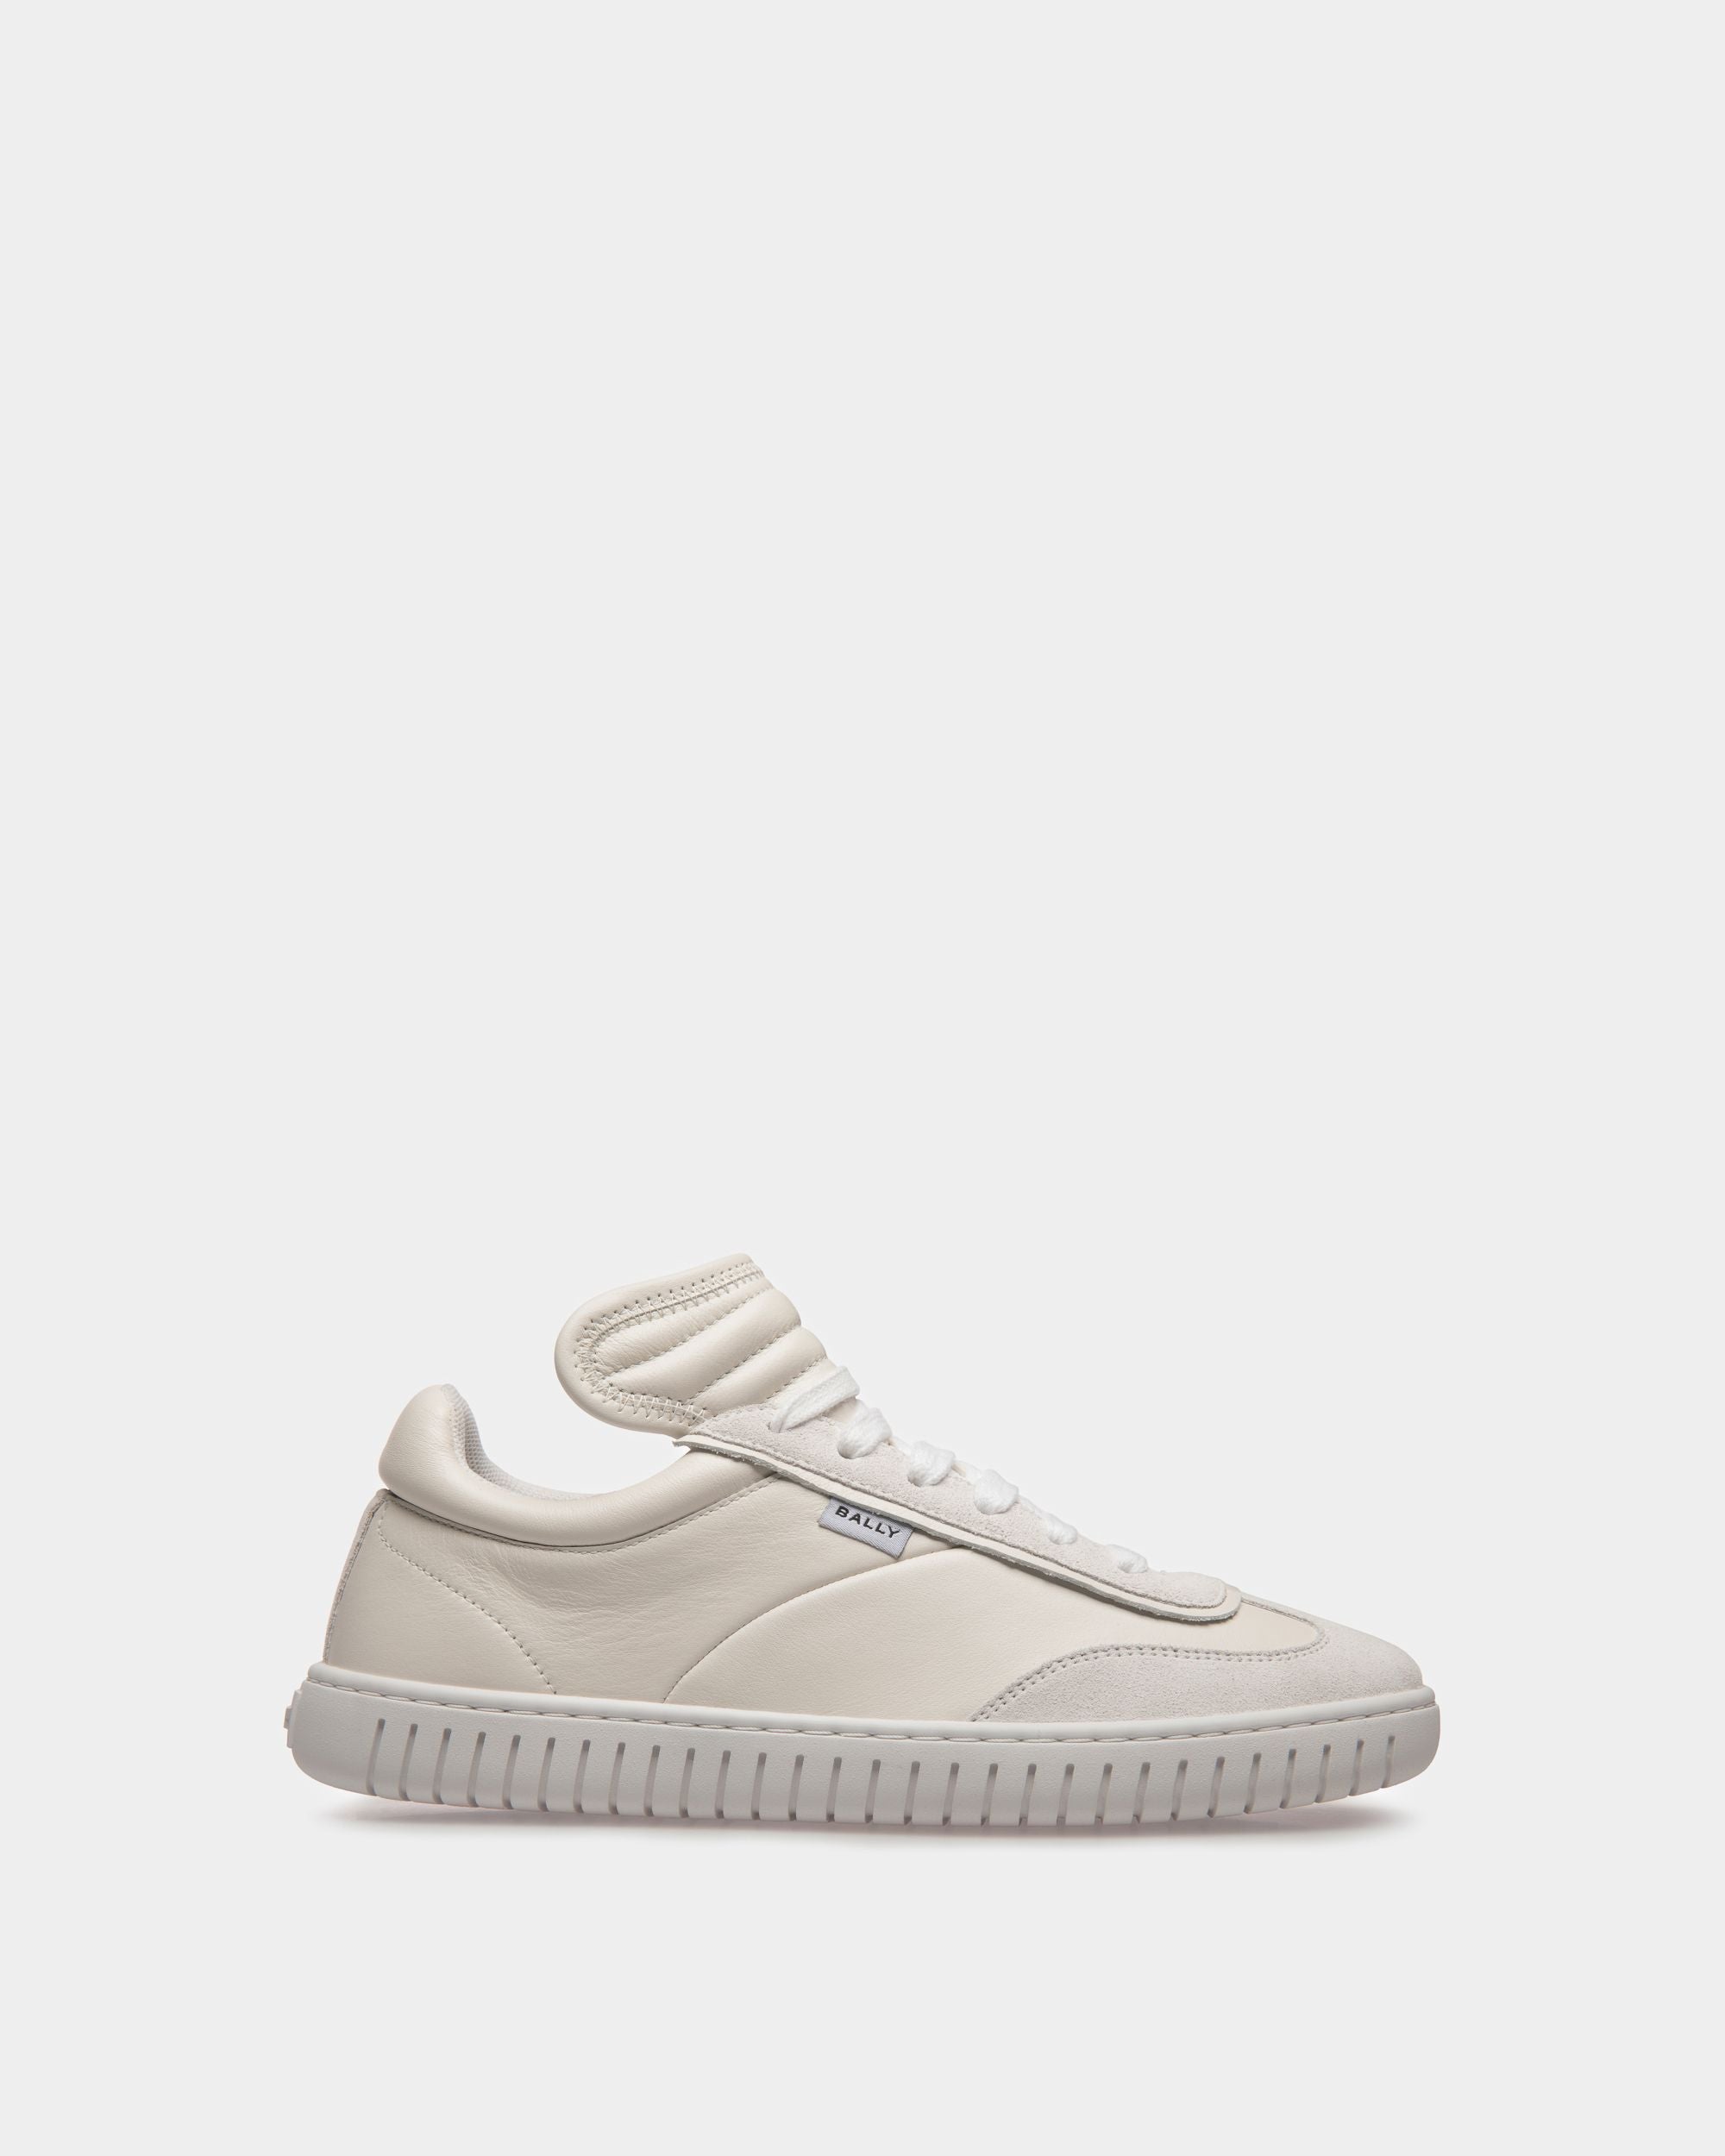 Parrel | Women's Sneakers | White Leather | Bally | Still Life Side